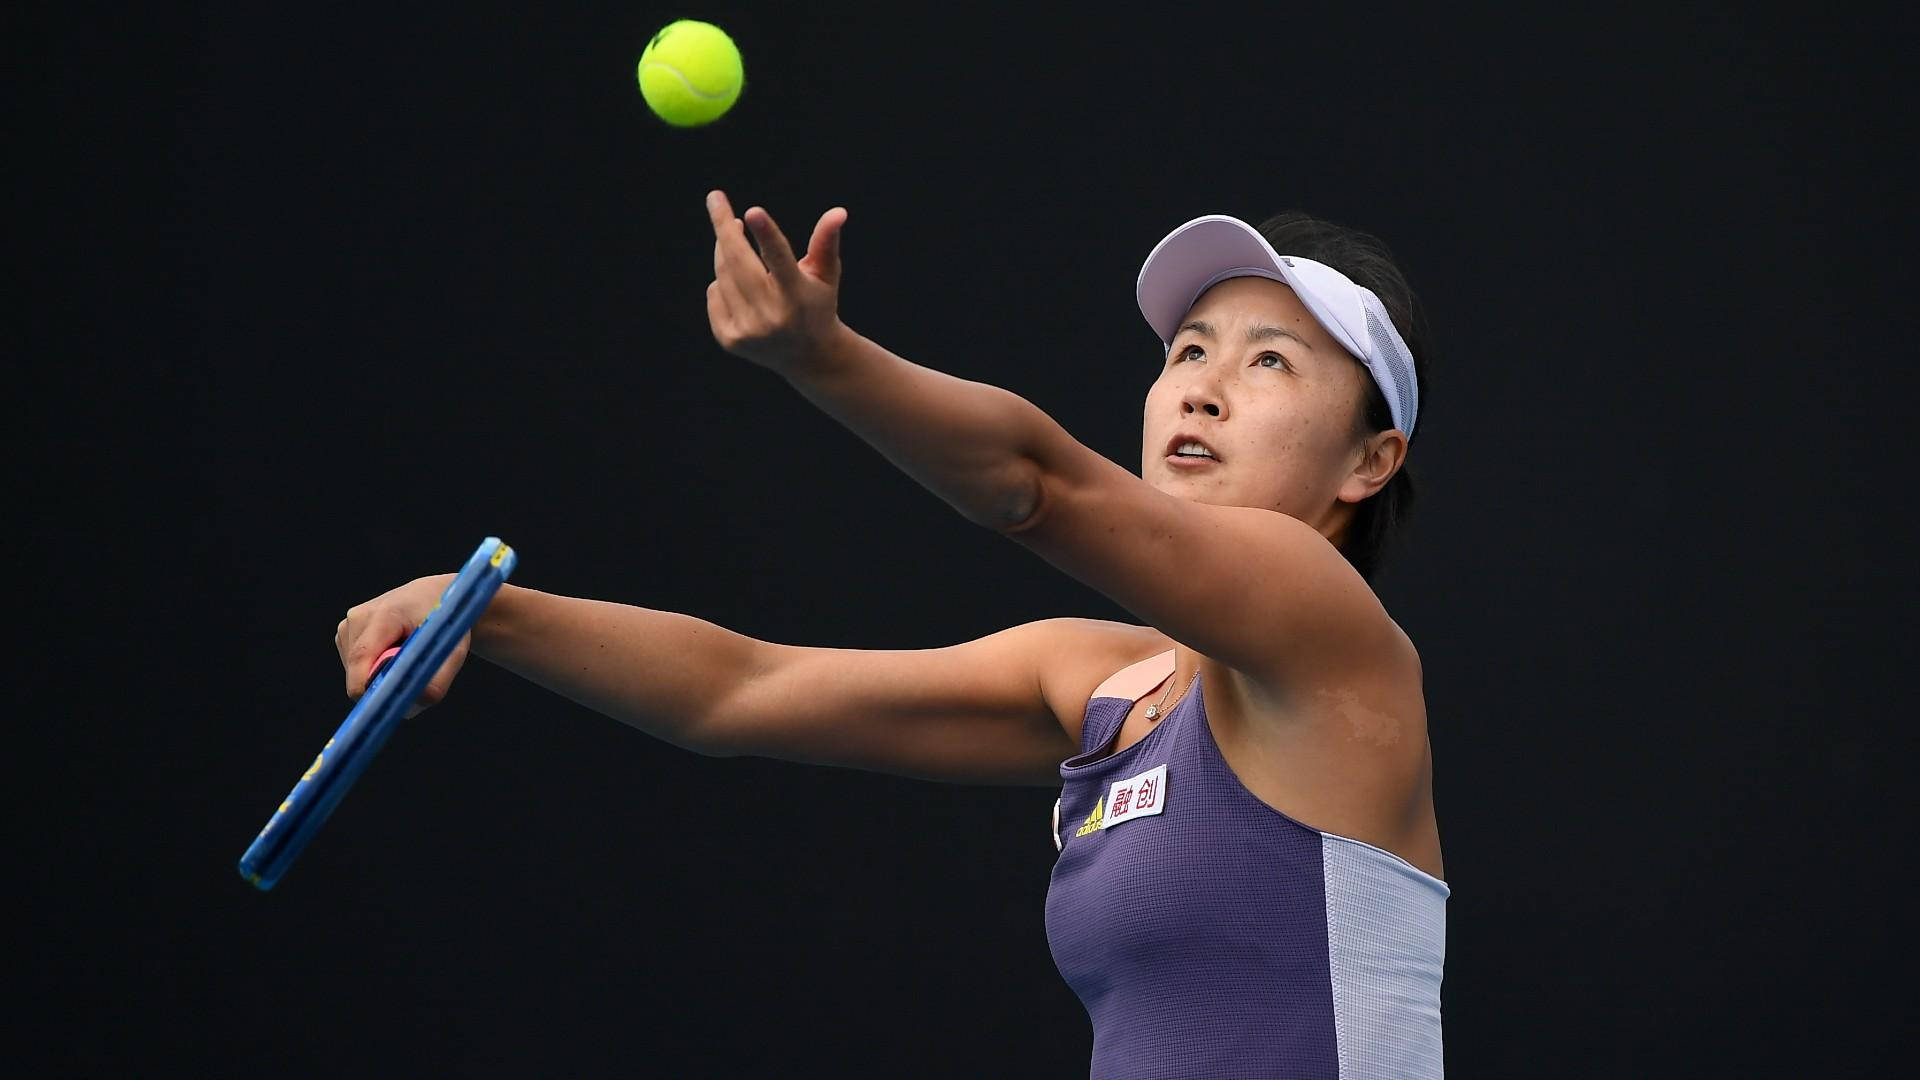 Shuai Peng in Action on the Court Wallpaper